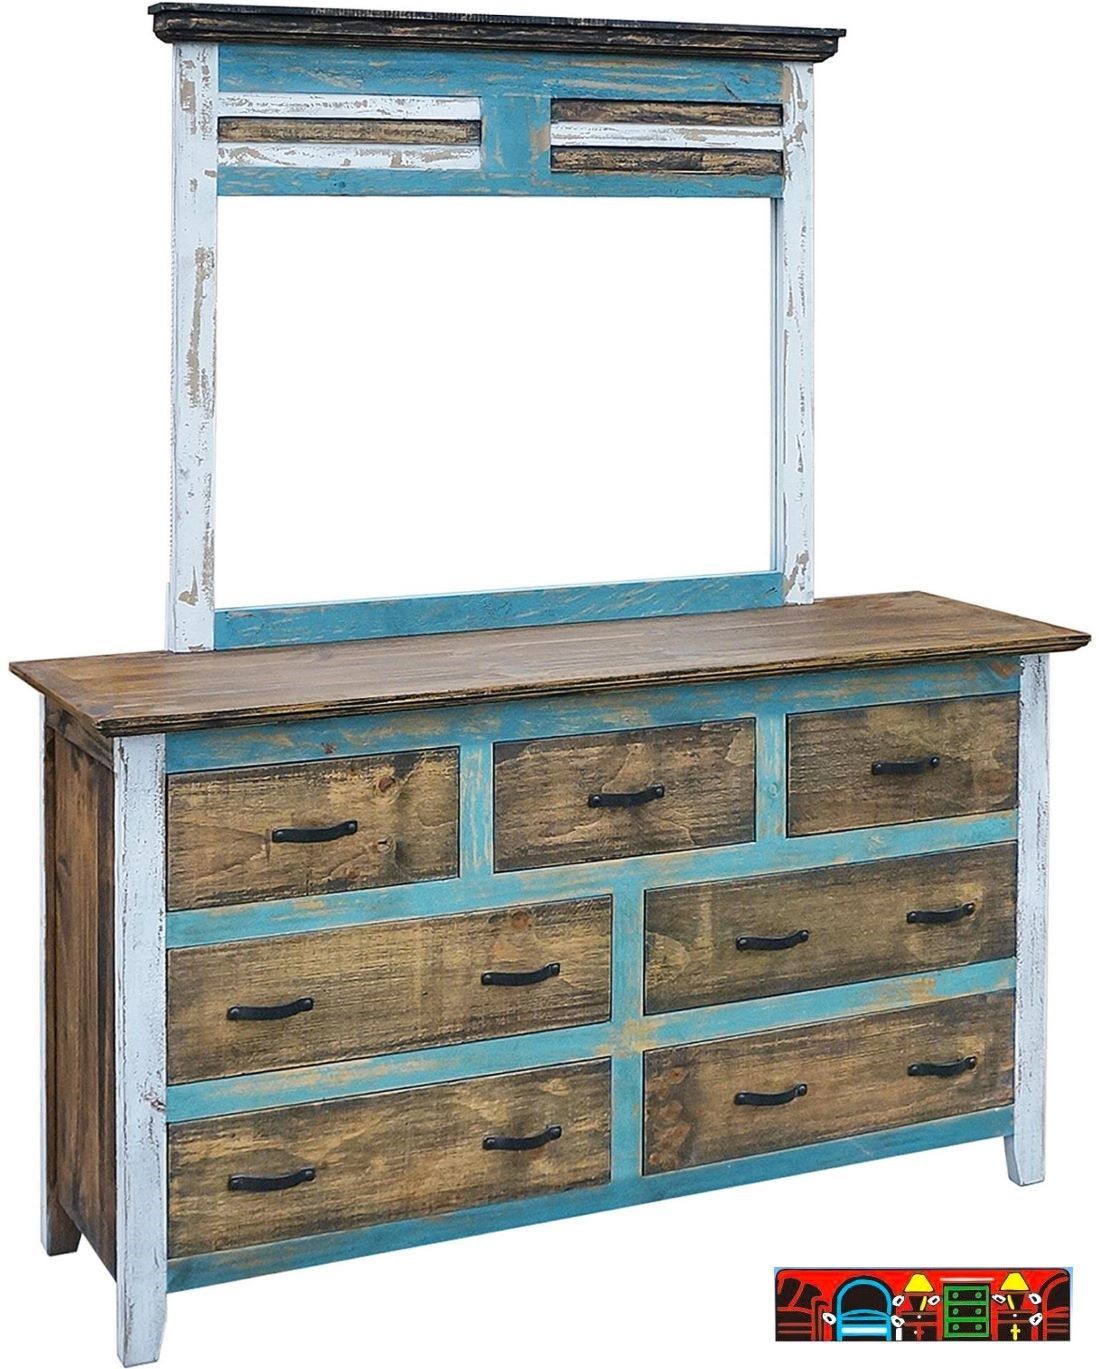 The Cabana Bedroom dresser and mirror is crafted from solid wood, featuring a blend of brown, white, and turquoise hues with seven drawers featuring curved metal handles.